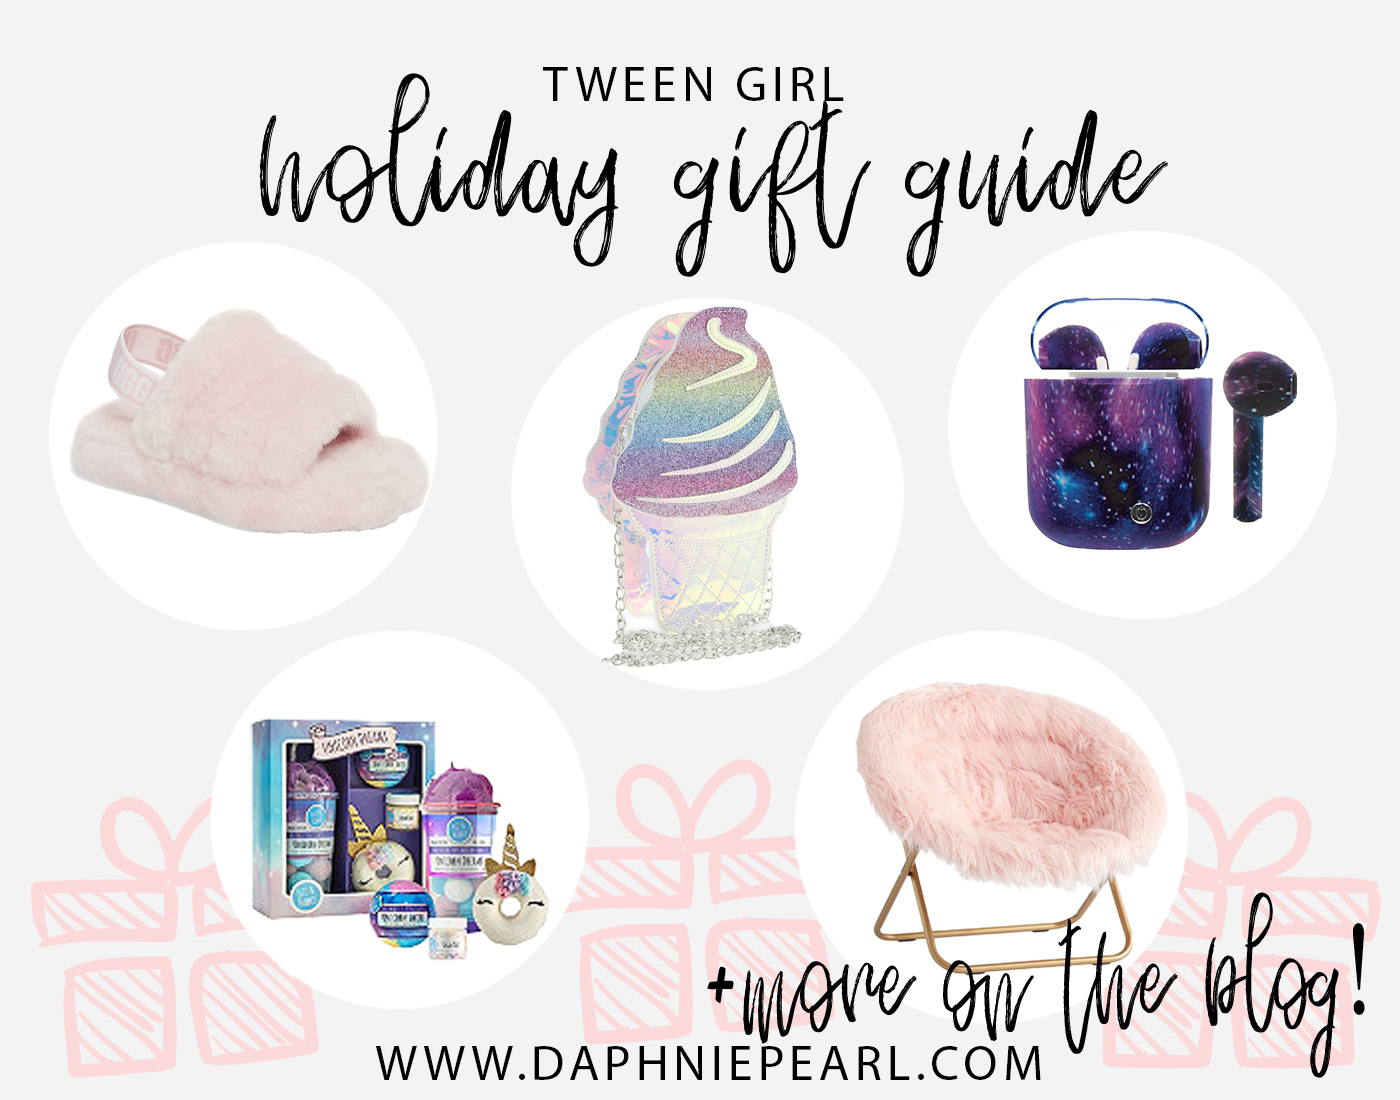 Tween Girls Gift Guide! Unique girl gift ideas for christmas birthday present affordable under $10 under $20 under $30 under $50 under $100 lol surprise ugg ipod hatchimals poopsie slime